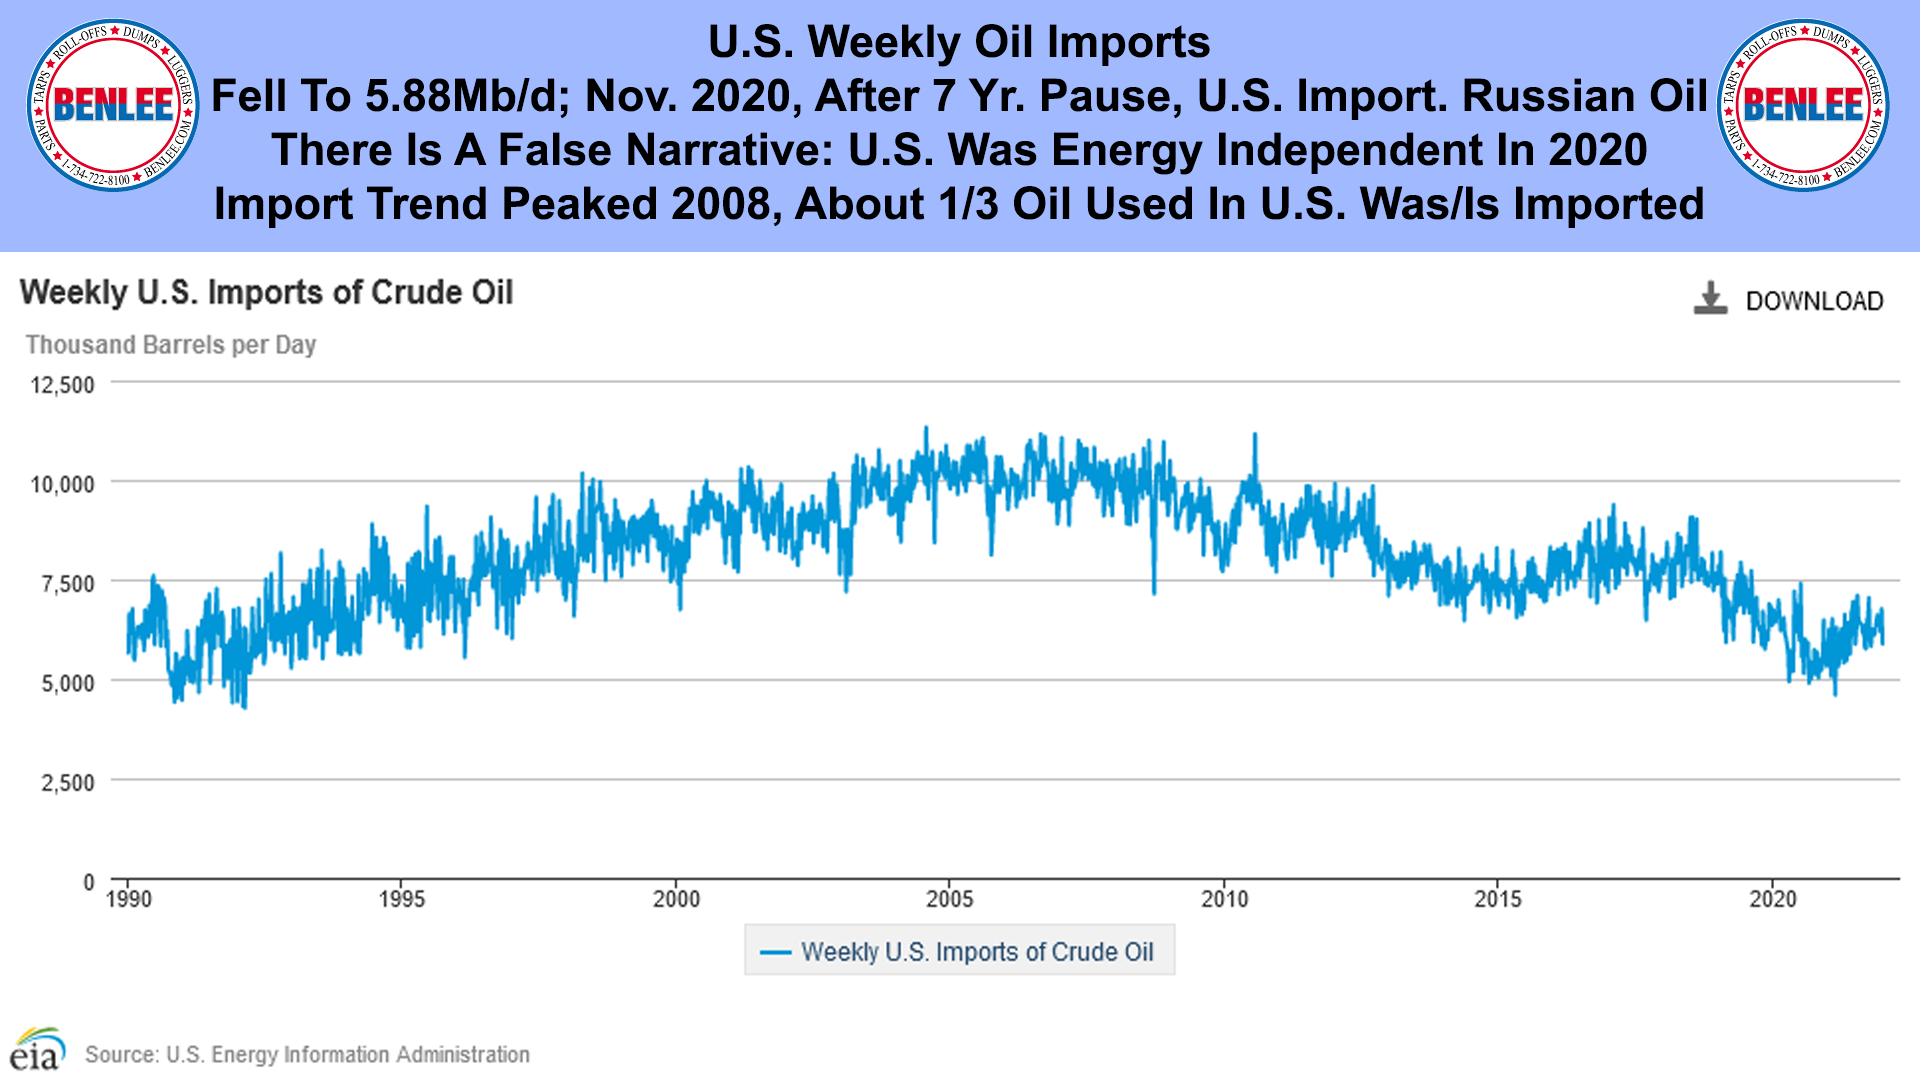 U.S. Weekly Oil Imports